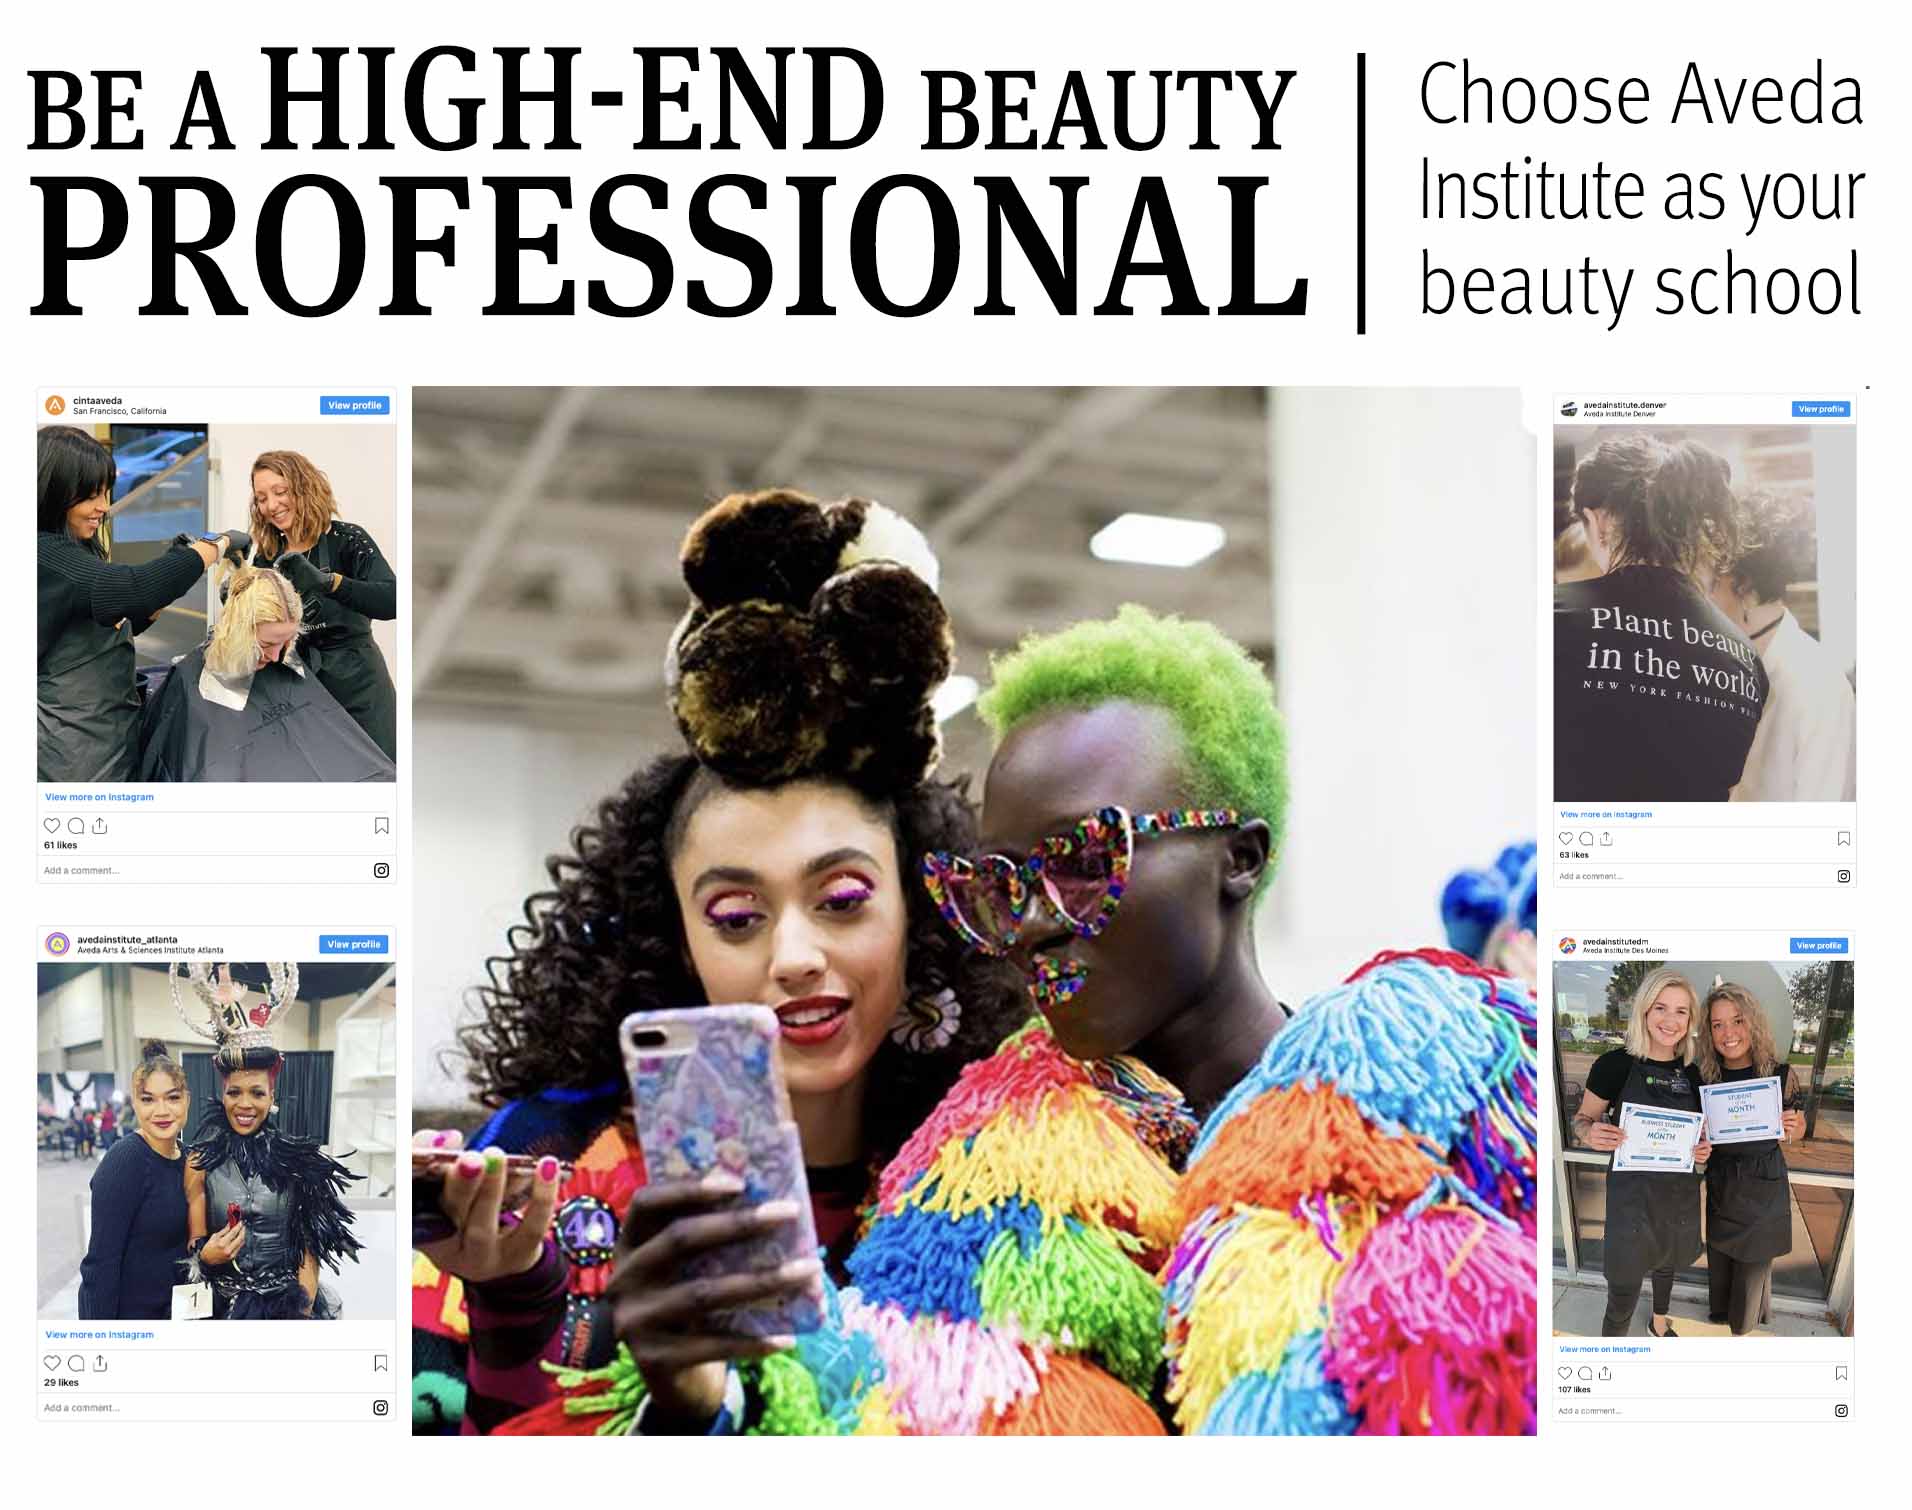 Image of Aveda Students at school